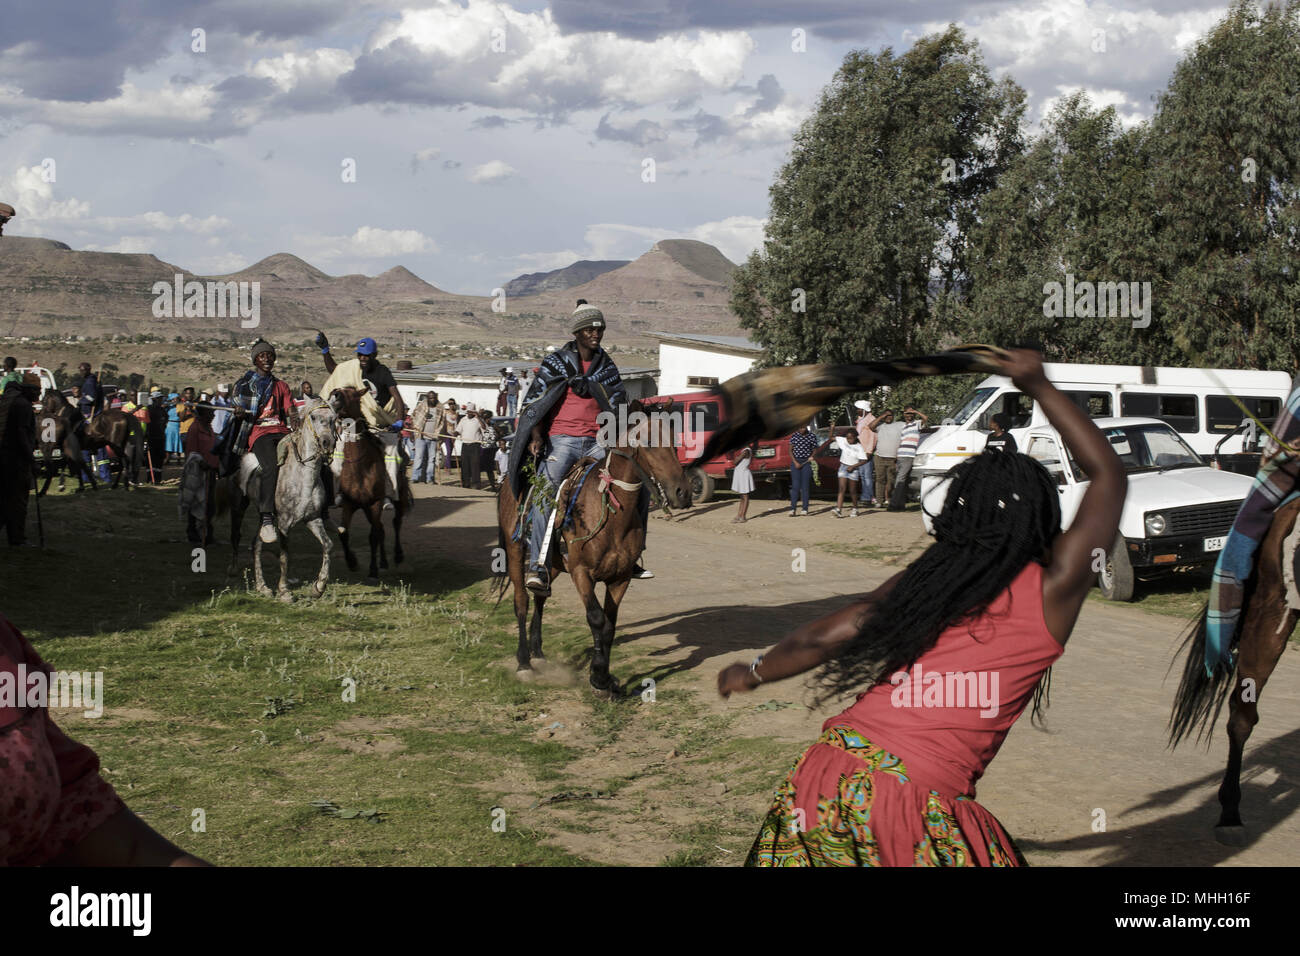 Matatiele, Eastern Cape, South Africa. 29th Dec, 2017. Xhosa people wait for the initiates to return from the mountains. Women and horse riders hit each other with sticks and textiles. Credit: Stefan Kleinowitz/zReportage.com/ZUMA Wire/Alamy Live News Stock Photo